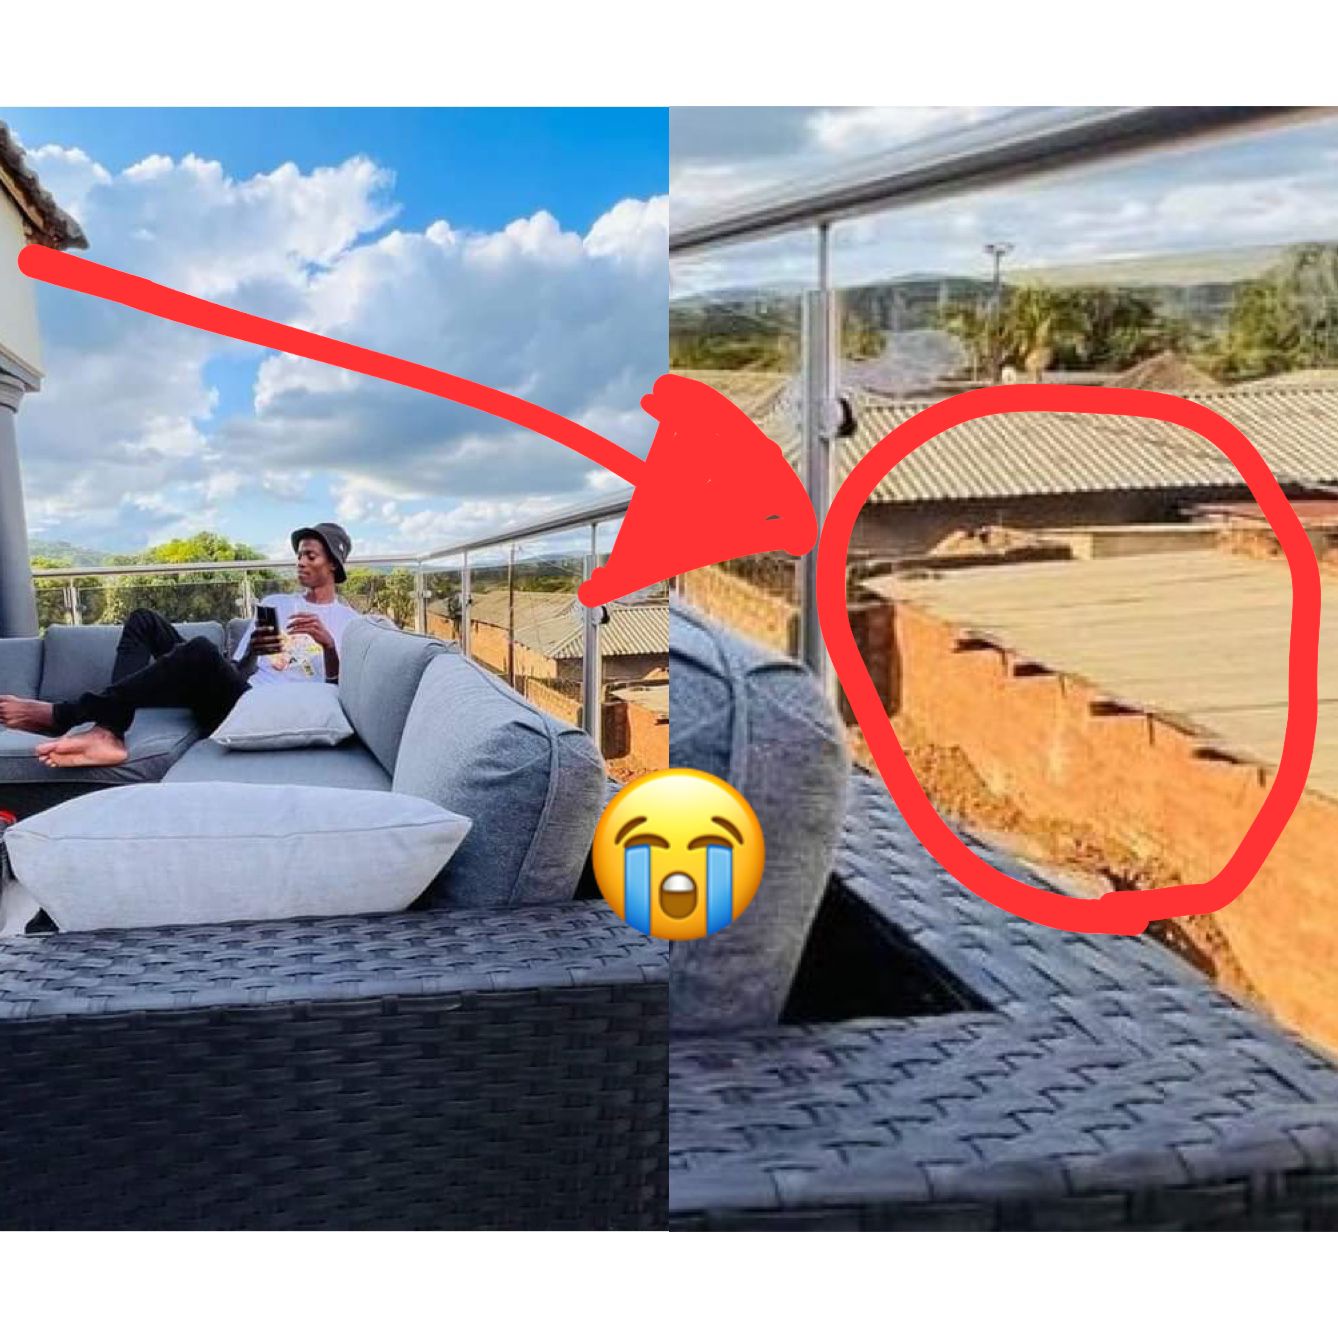 King Monada Posted a Photo Of His Beautiful House But People Noticed Something that Left Many Sad 1